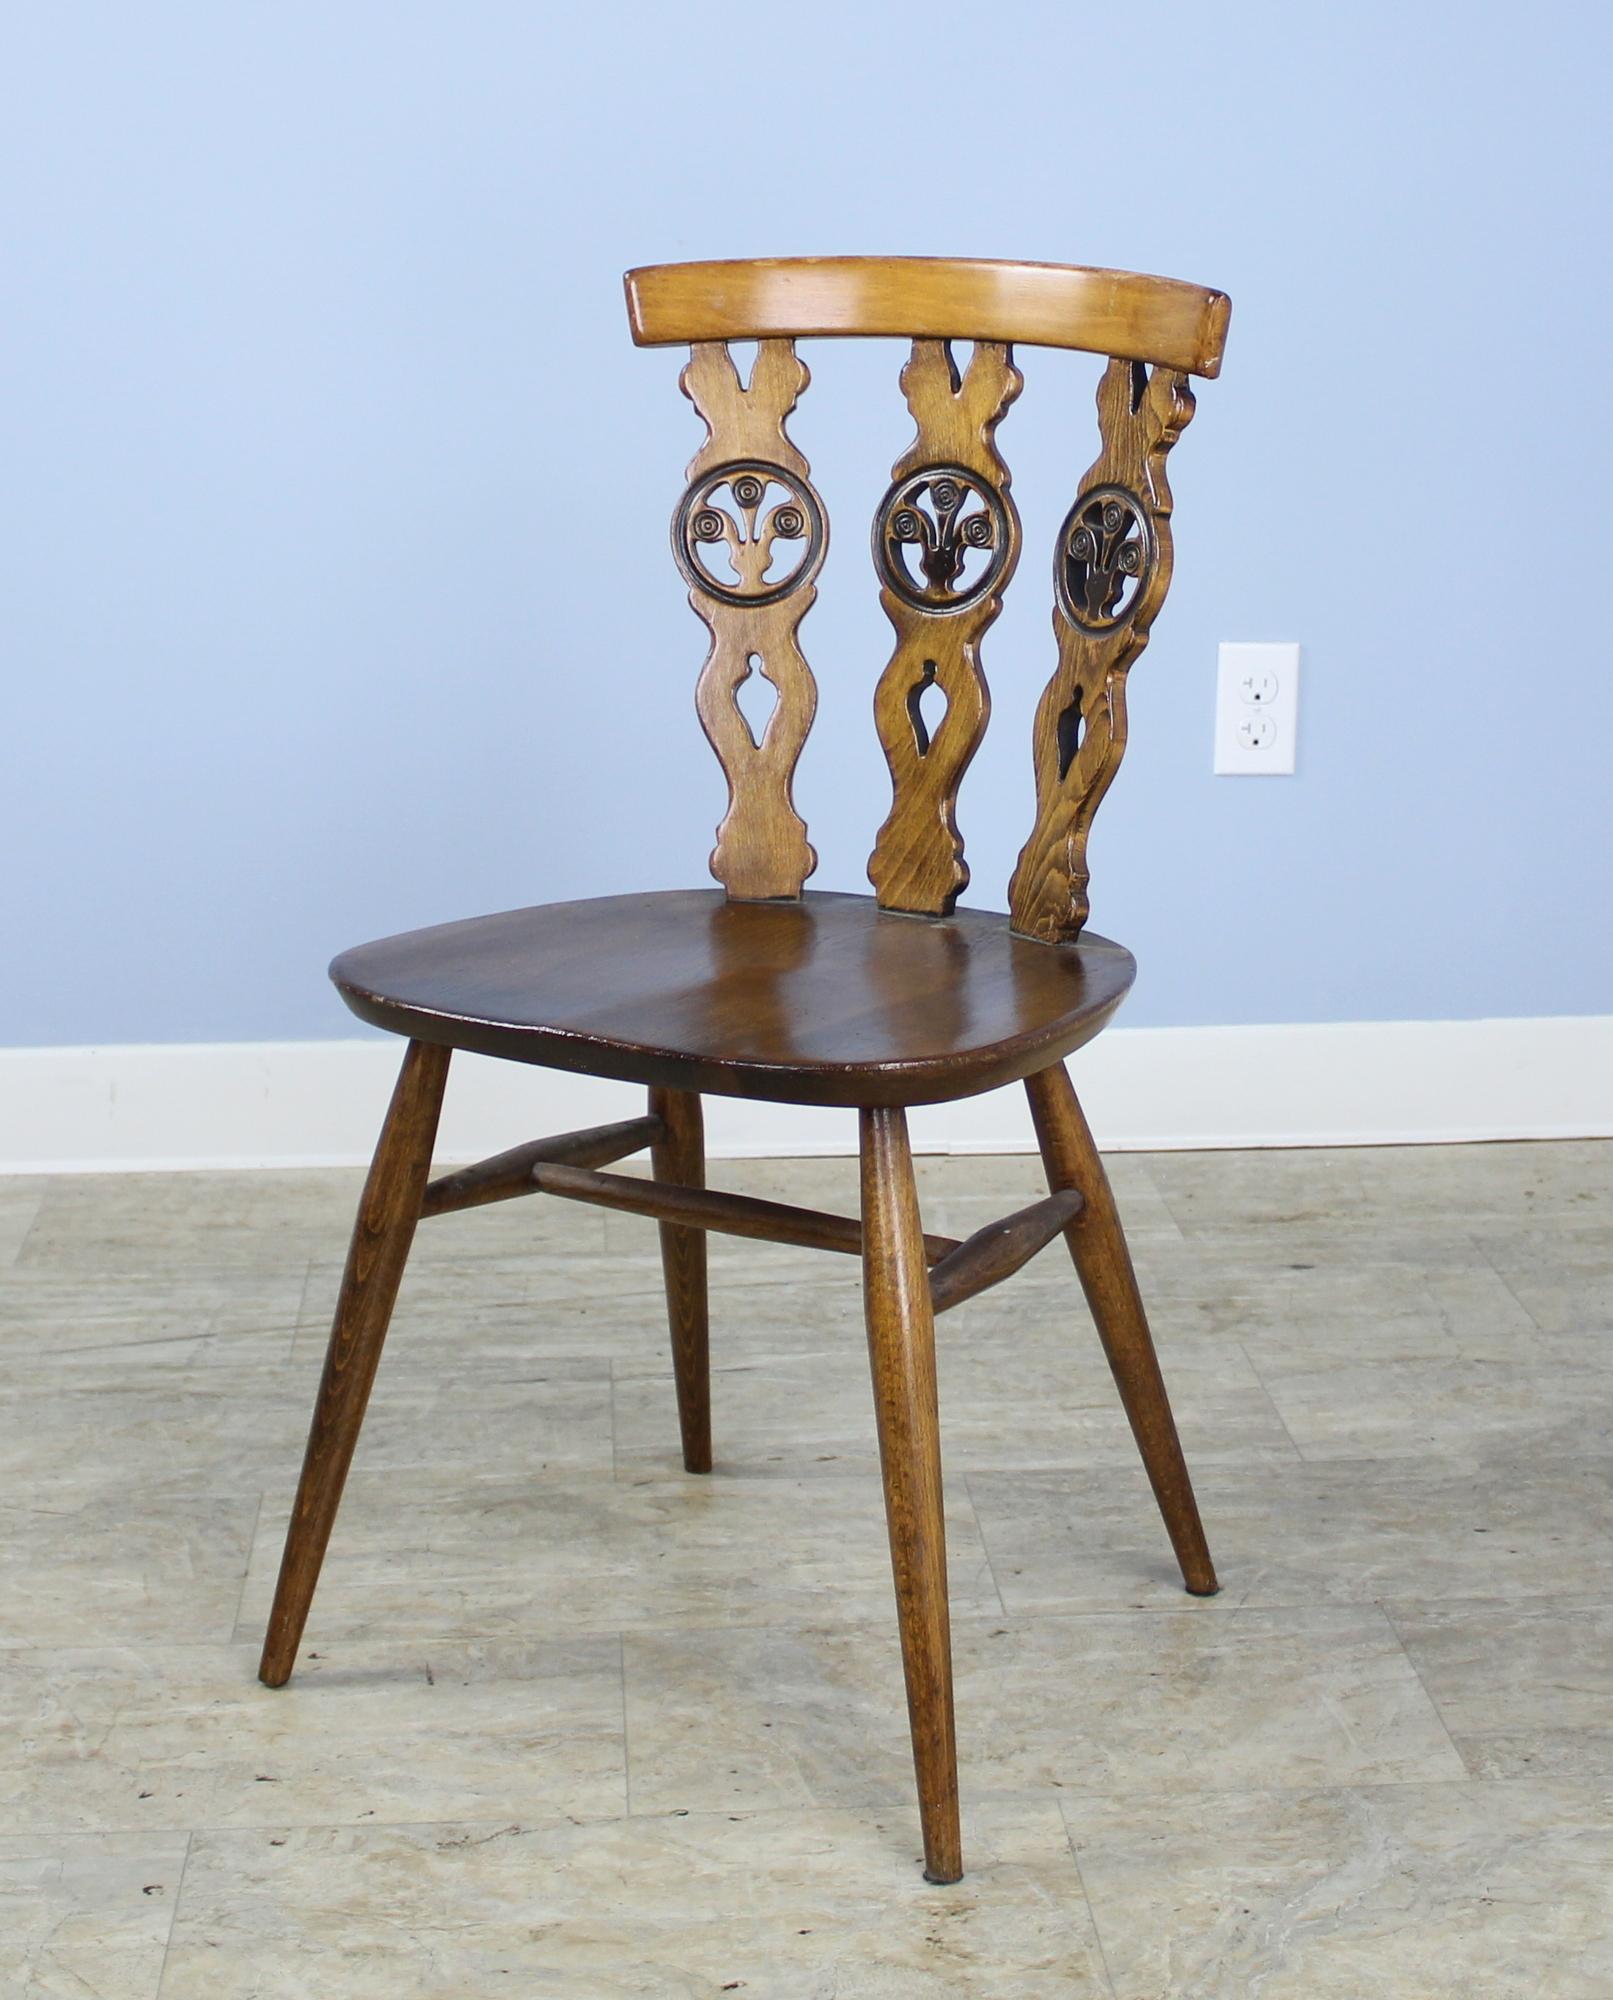 A charming 1920s set of four small kitchen chairs, each with the Prince of Wales feather motif carved into the back. The combination of dark elm and light fruit woods creates a nice color contrast in the design.